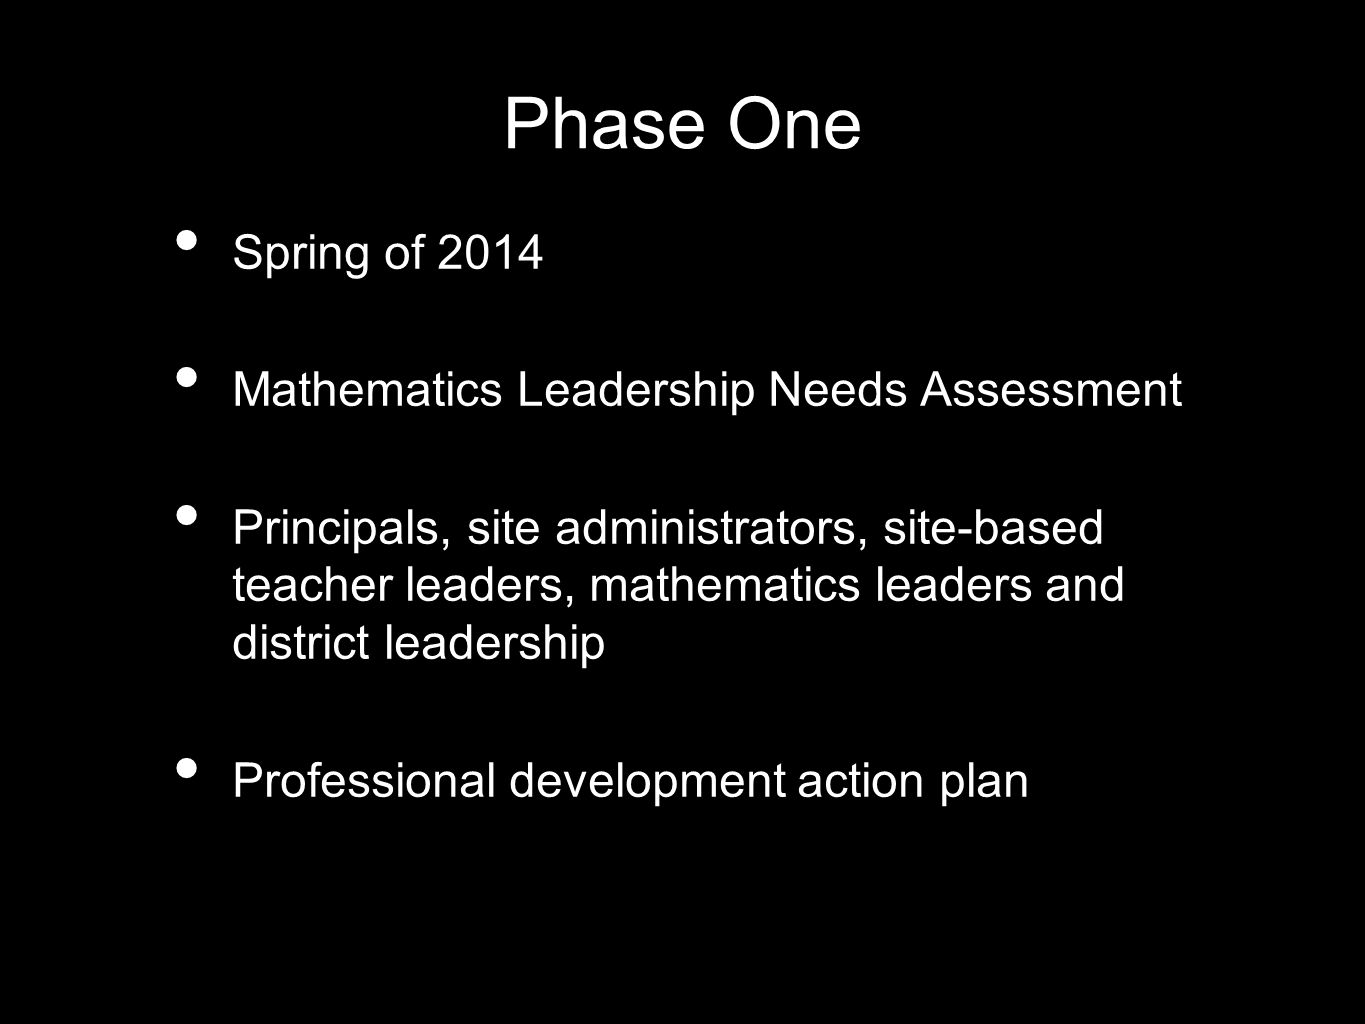 Phase One Spring of 2014 Mathematics Leadership Needs Assessment Principals, site administrators, site-based teacher leaders, mathematics leaders and district leadership Professional development action plan